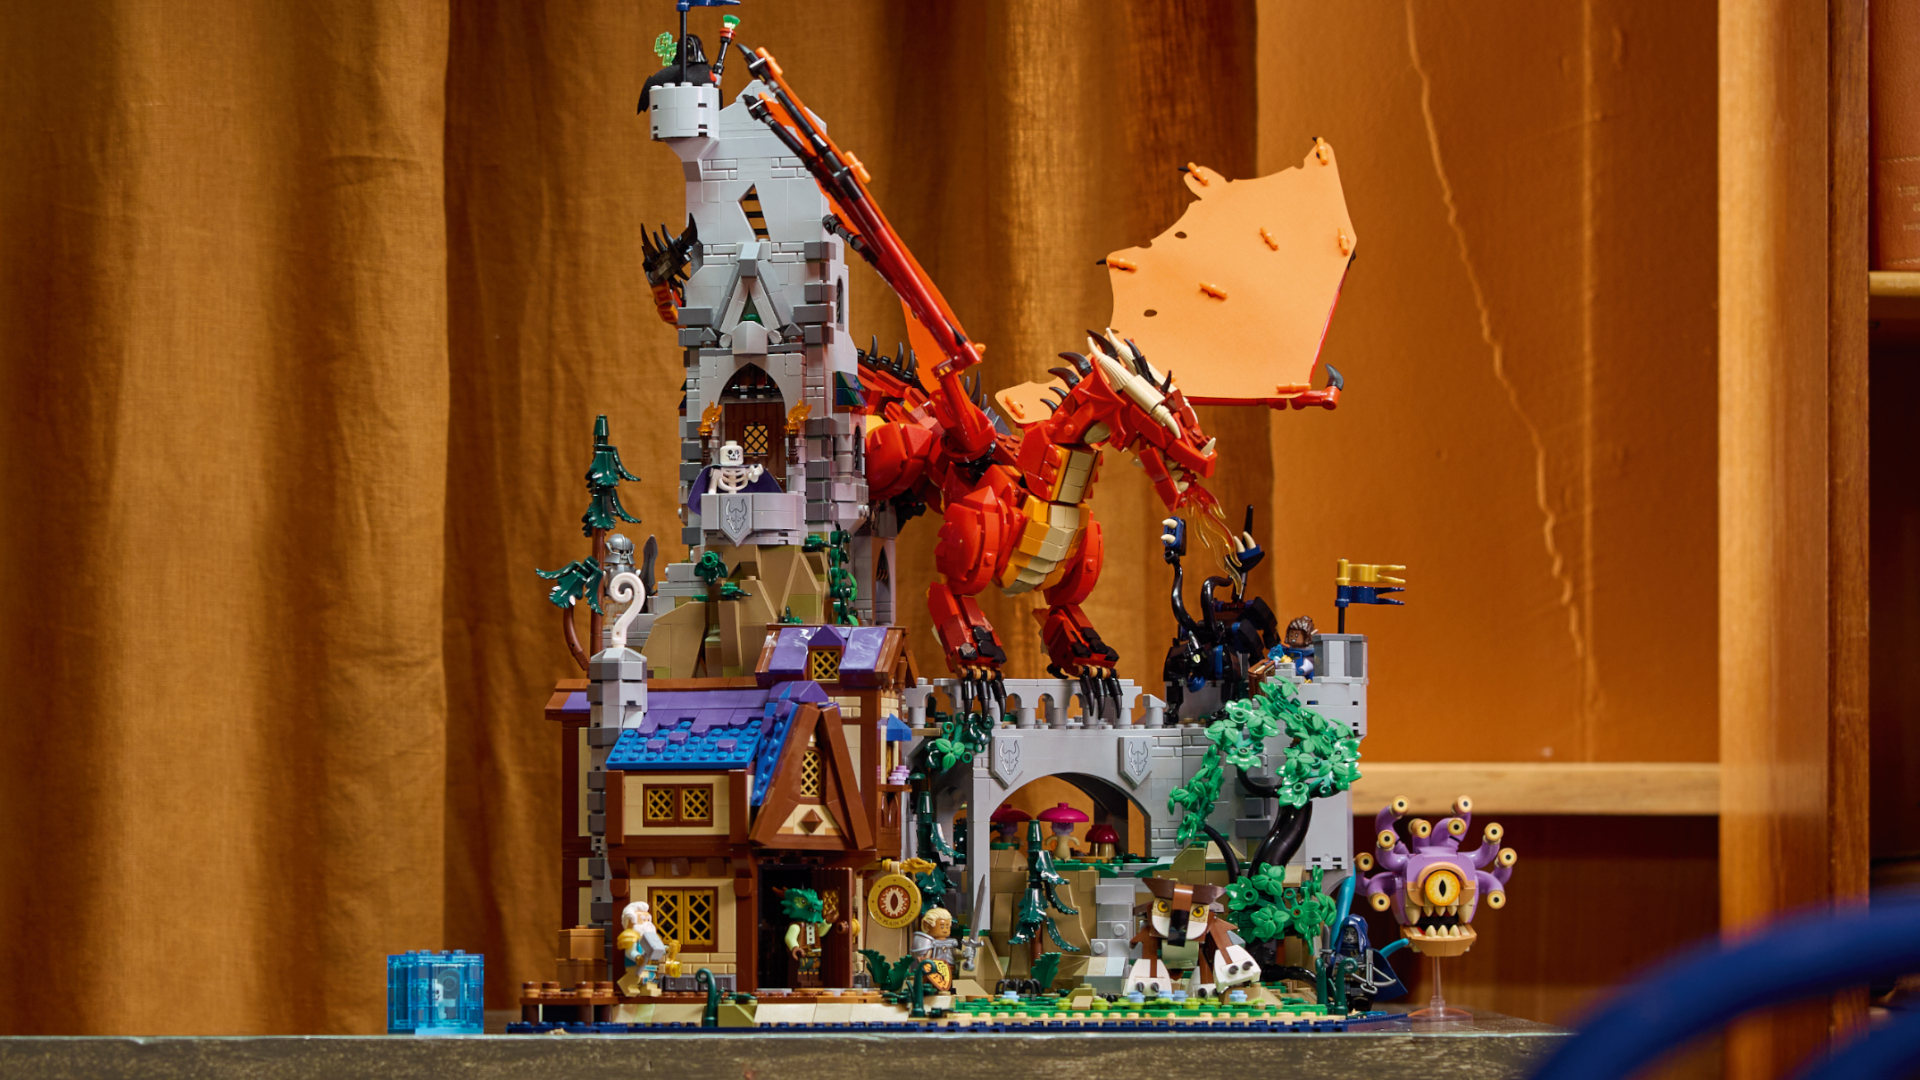 The full Lego D&D set on a table, with curtains and a bookshelf in the background